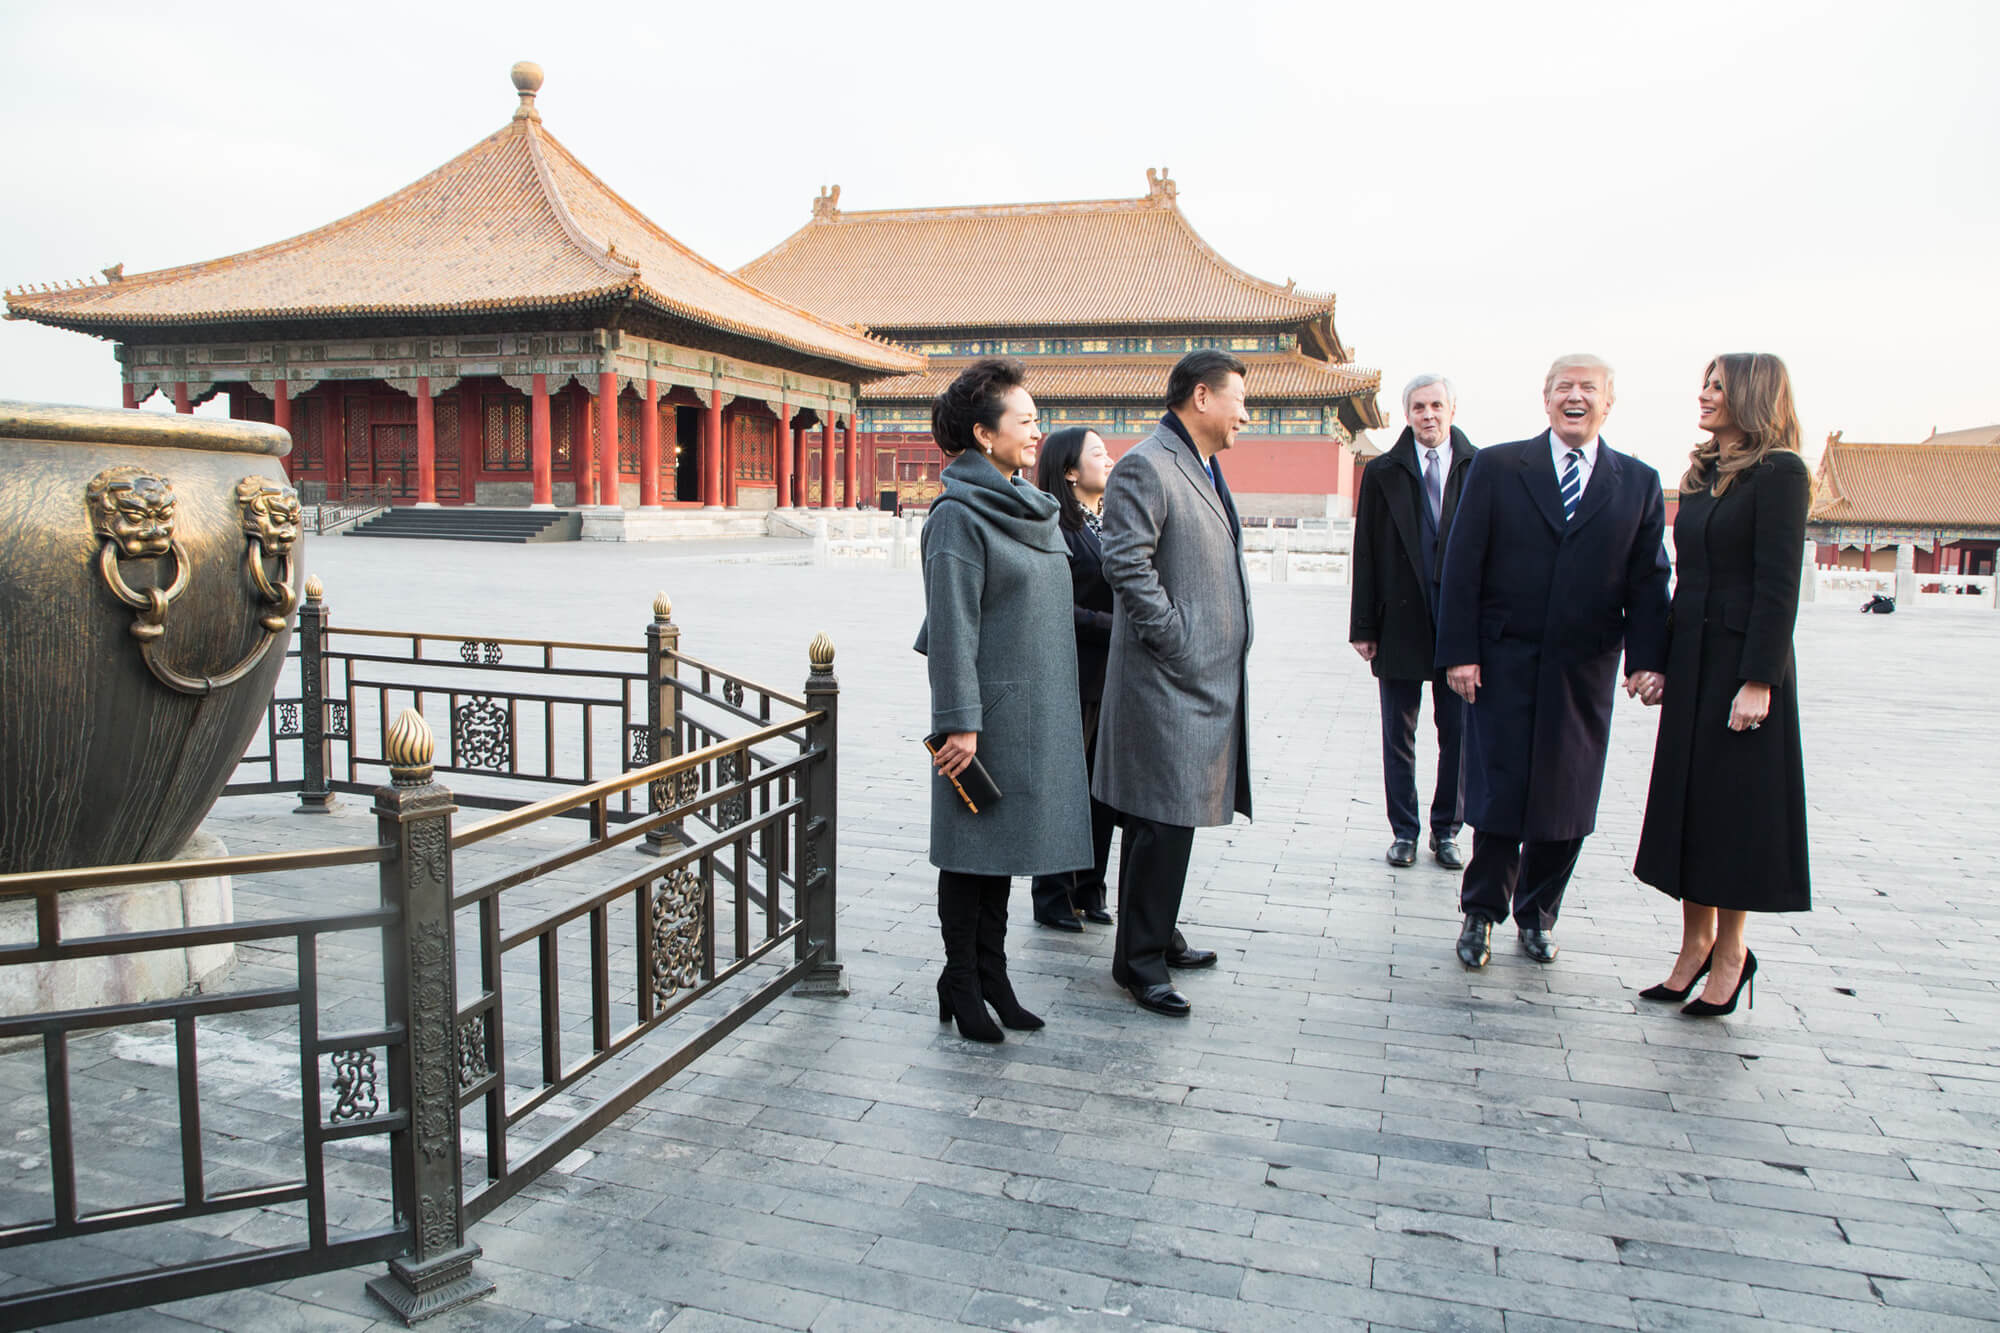 President Donald J. Trump and First Lady Melania Trump, joined by President Xi Jinping and First Lady Peng Liyuan, right, are given a tour on November 8 2017 of the Forbidden City in Beijing. (Official White House Photo by Shealah Craighead)